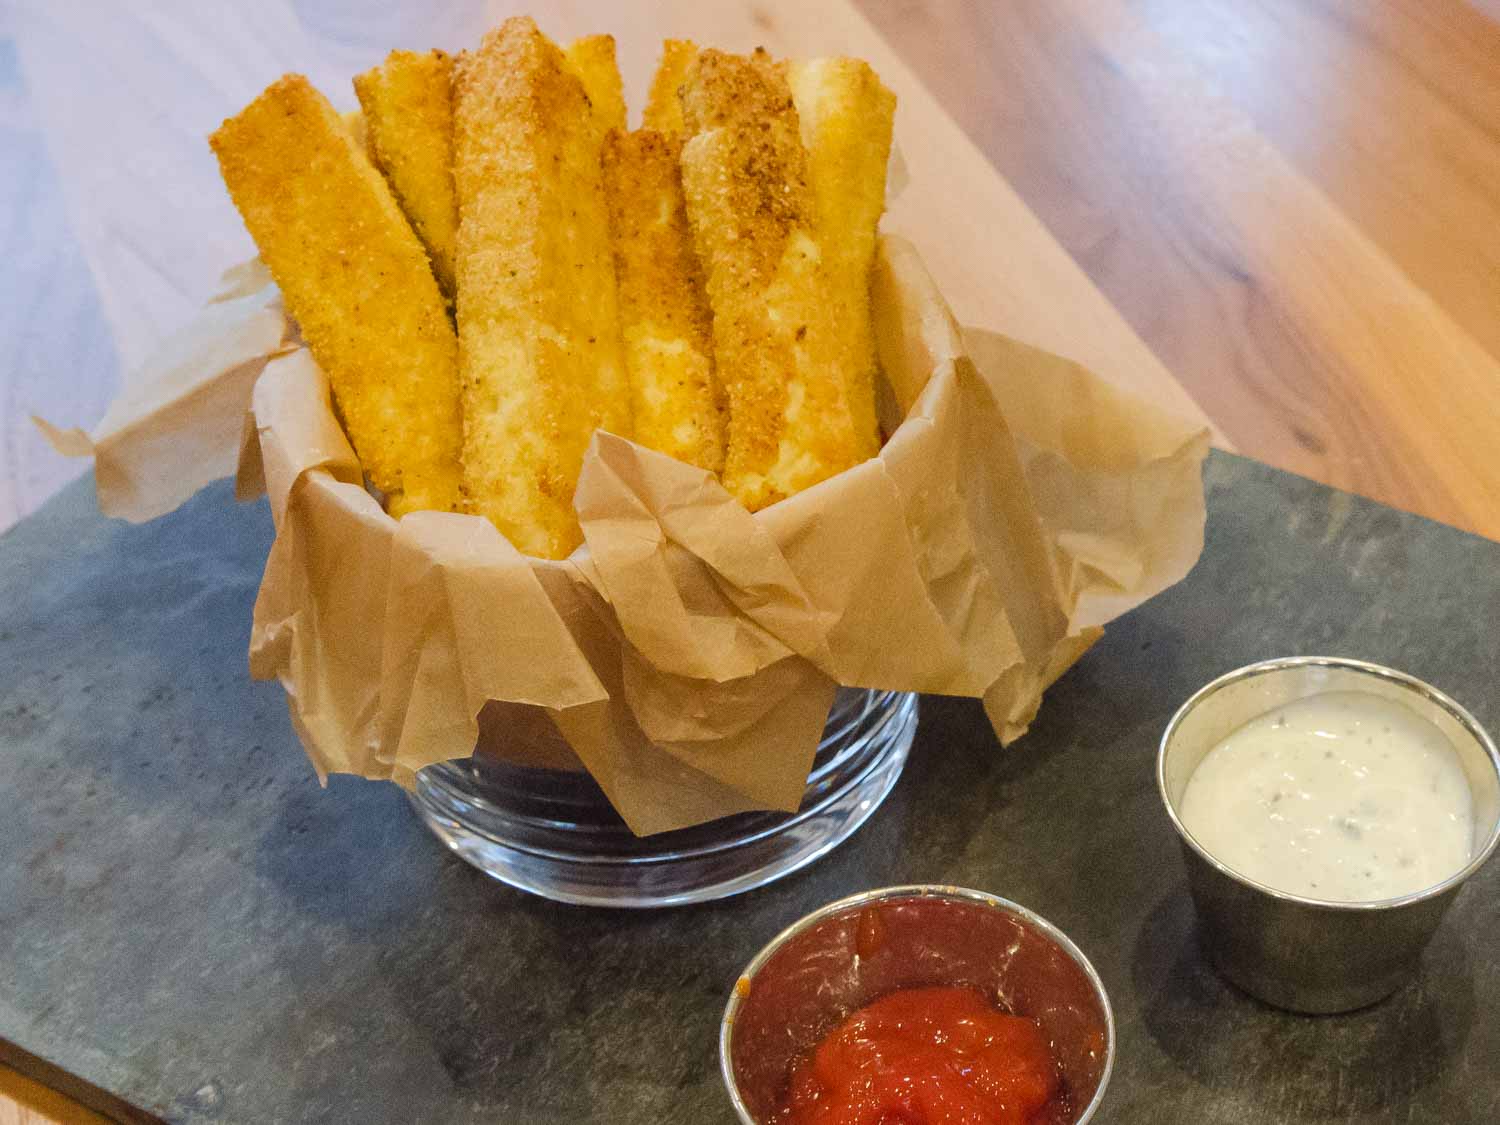 Crispy Baked Tofu Fries and sauces